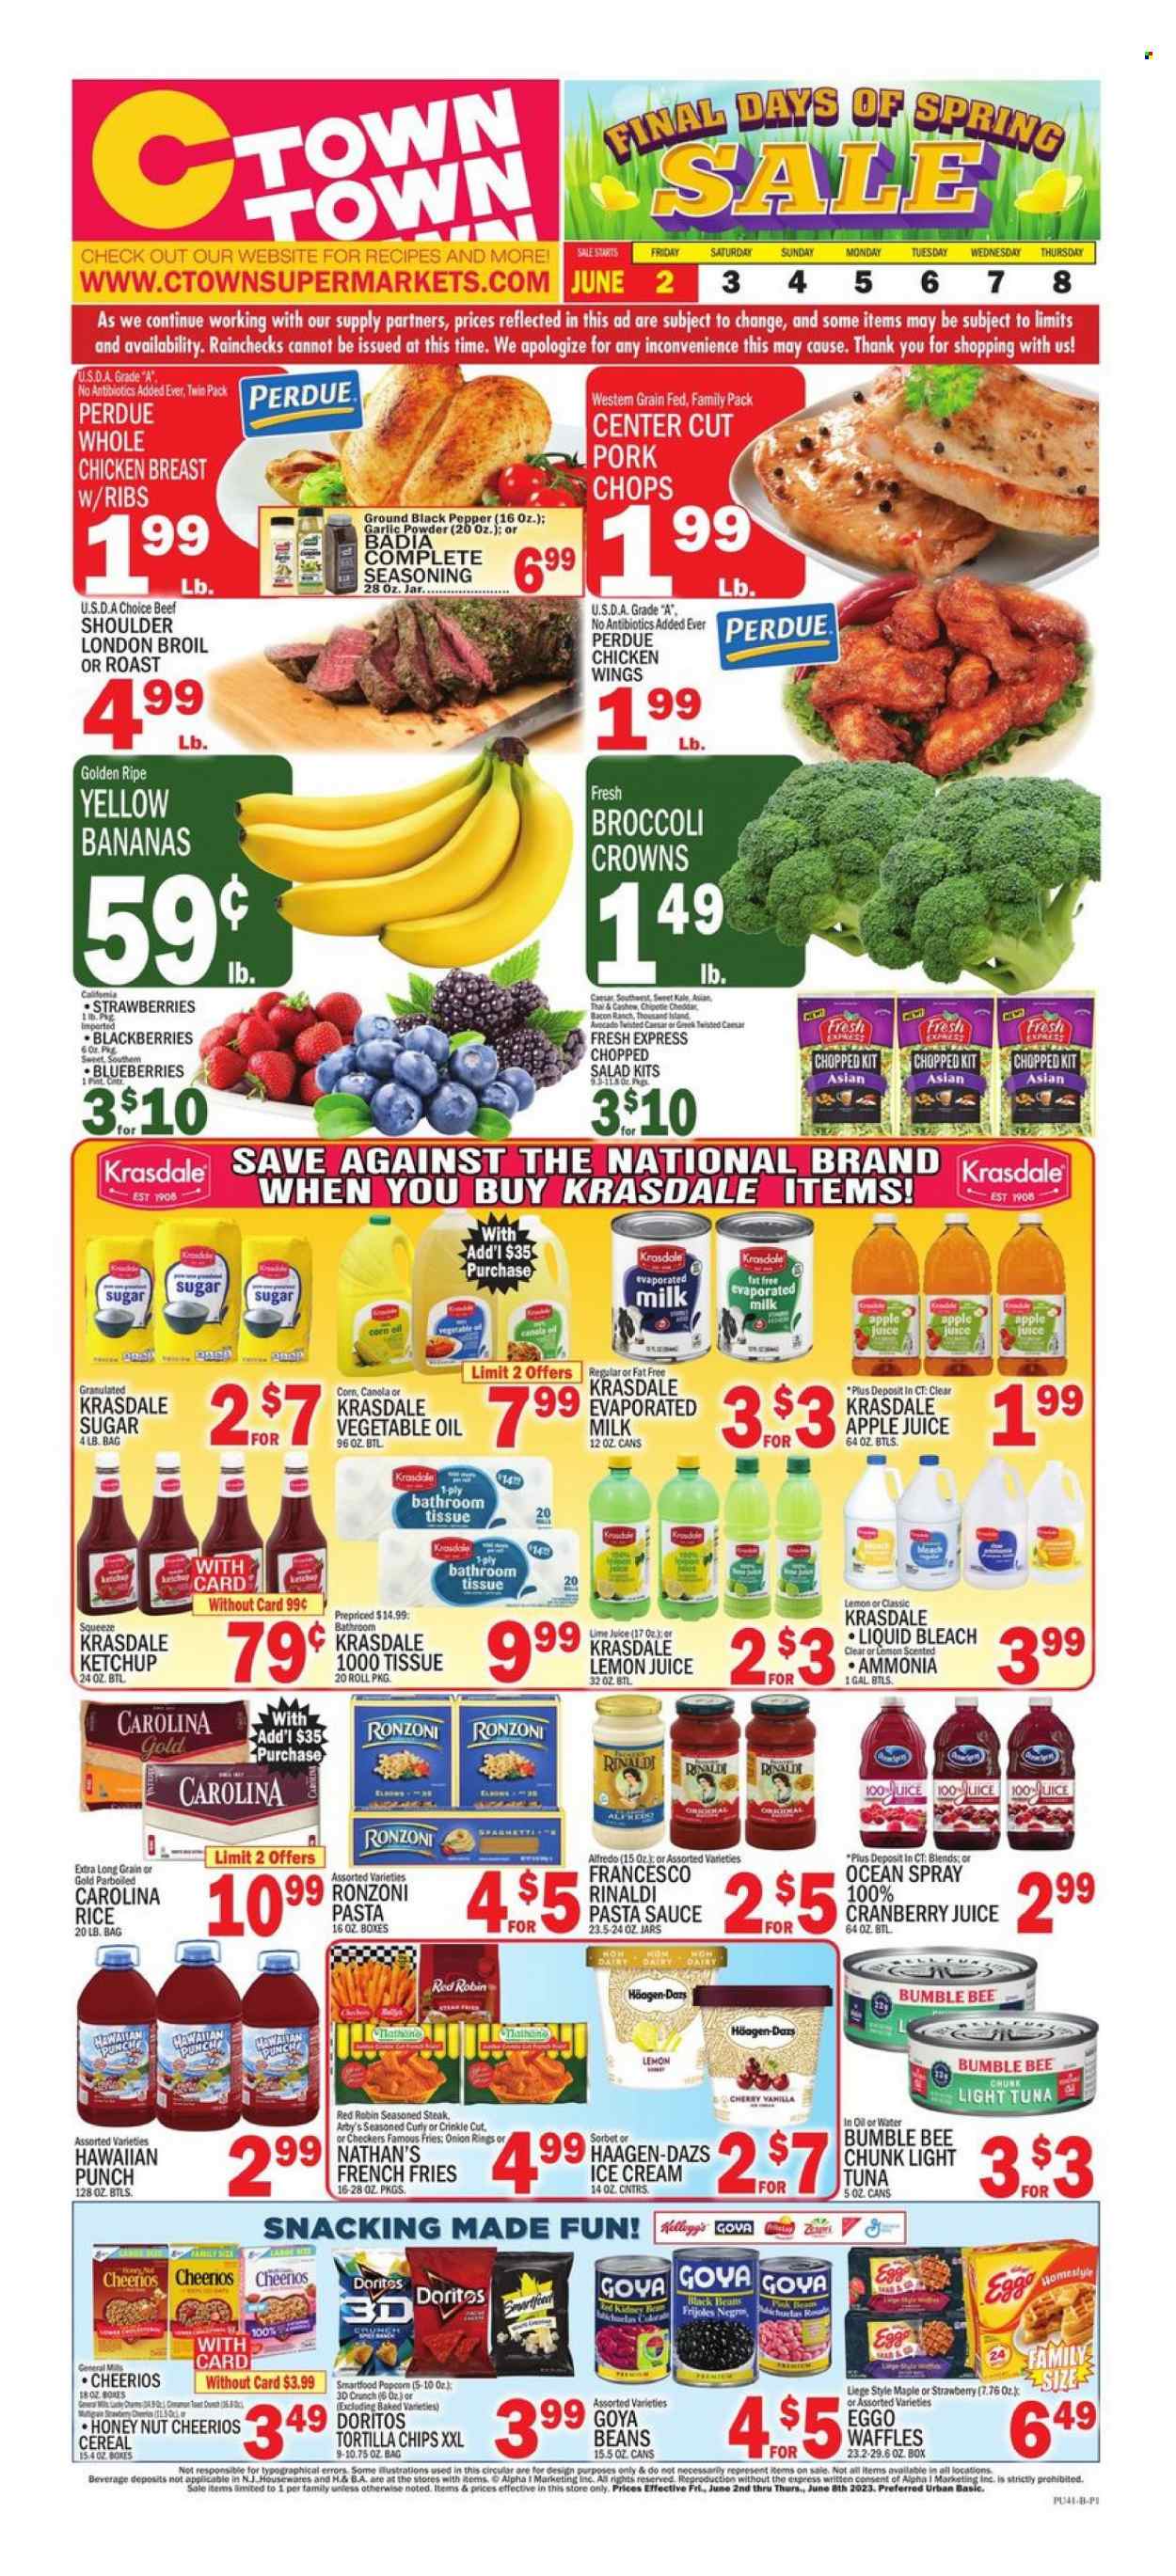 thumbnail - C-Town Flyer - 06/02/2023 - 06/08/2023 - Sales products - waffles, beans, kale, salad, chopped salad, blackberries, cherries, tuna, spaghetti, pasta sauce, onion rings, Bumble Bee, sauce, Perdue®, roast, ready meal, bacon, evaporated milk, Thousand Island dressing, ice cream, Häagen-Dazs, chicken wings, potato fries, french fries, Kellogg's, General Mills, Doritos, tortilla chips, chips, Smartfood, salty snack, black beans, light tuna, Goya, Badia, cereals, Cheerios, rice, parboiled rice, spice, garlic powder, ketchup, canola oil, corn oil, vegetable oil, apple juice, cranberry juice, fruit punch, water, lemon juice, whole chicken, chicken breasts, steak, ribs, pork chops, pork meat. Page 2.